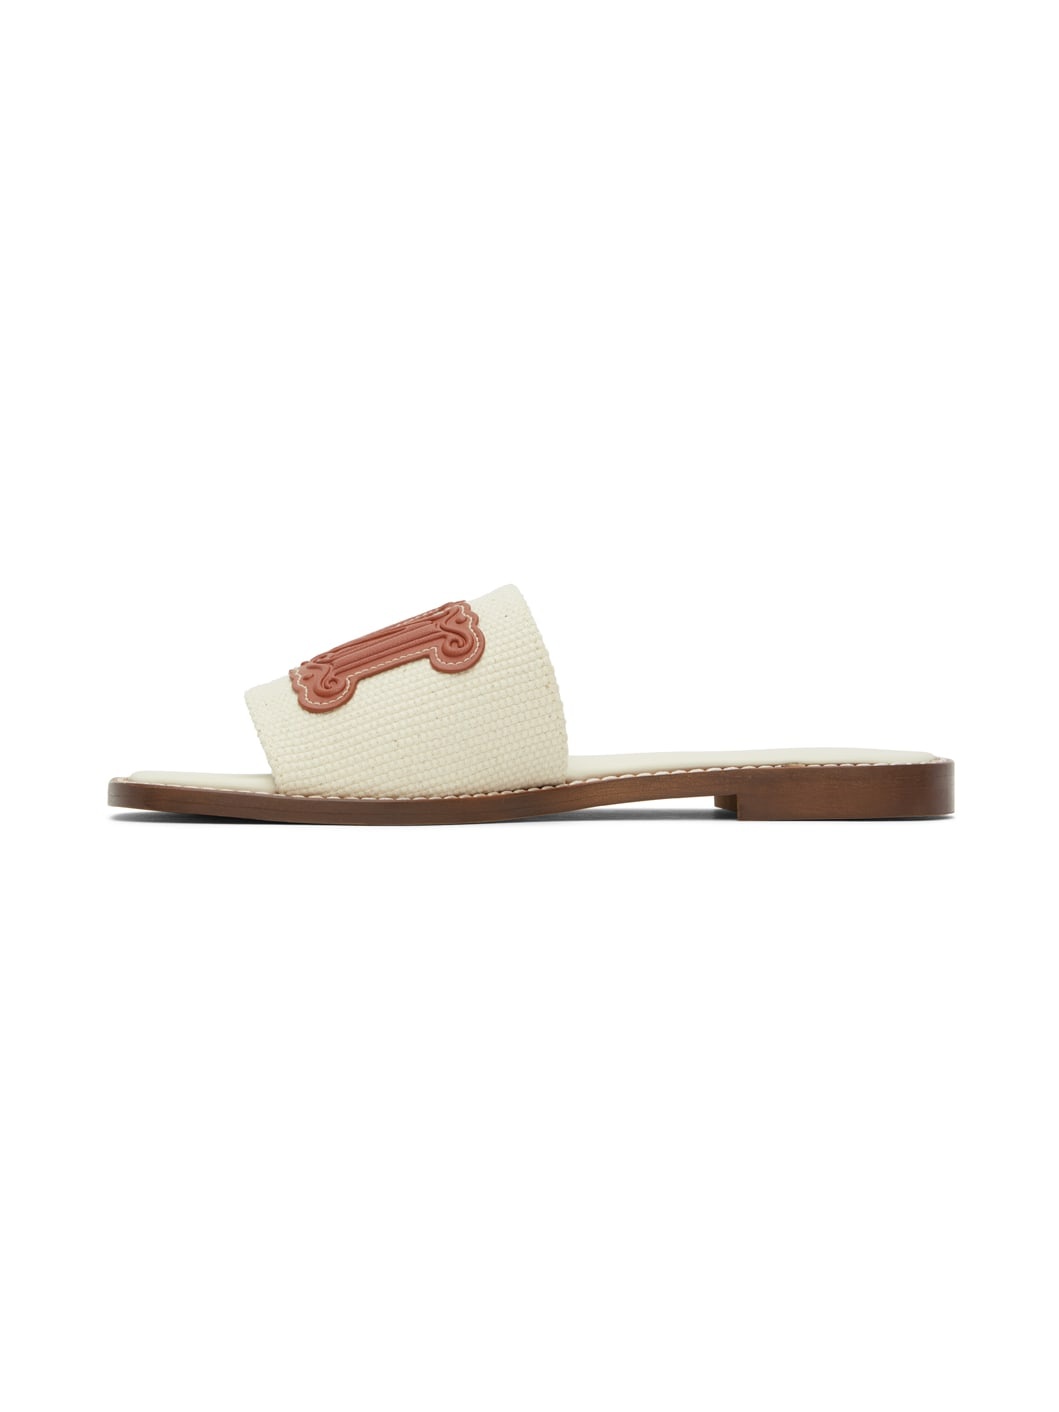 Off-White Geneve Sandals - 3